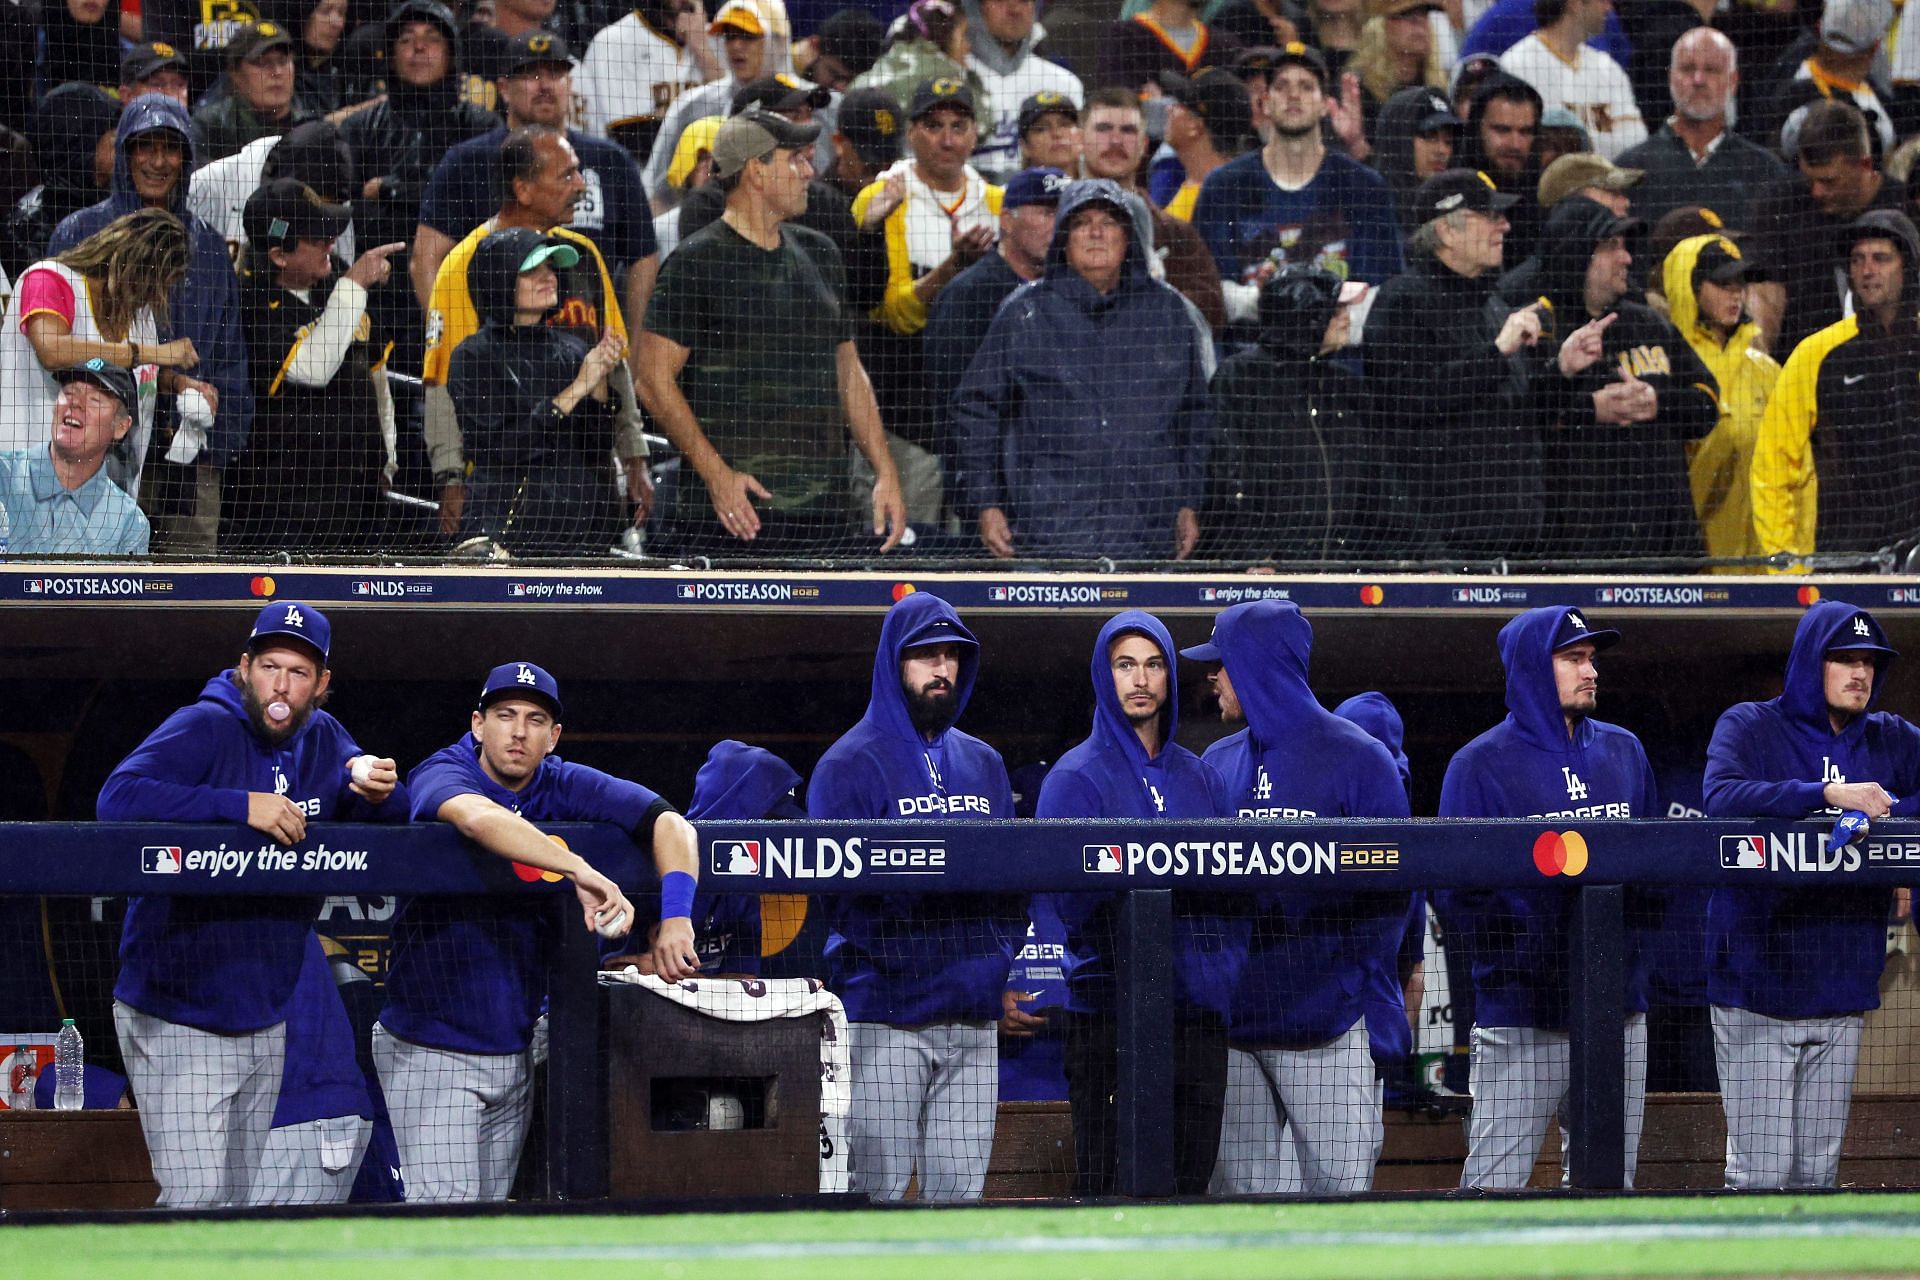 The Los Angeles Dodgers dugout reacts during the ninth inning against the San Diego Padres in Game 4 of the National League Division Series.